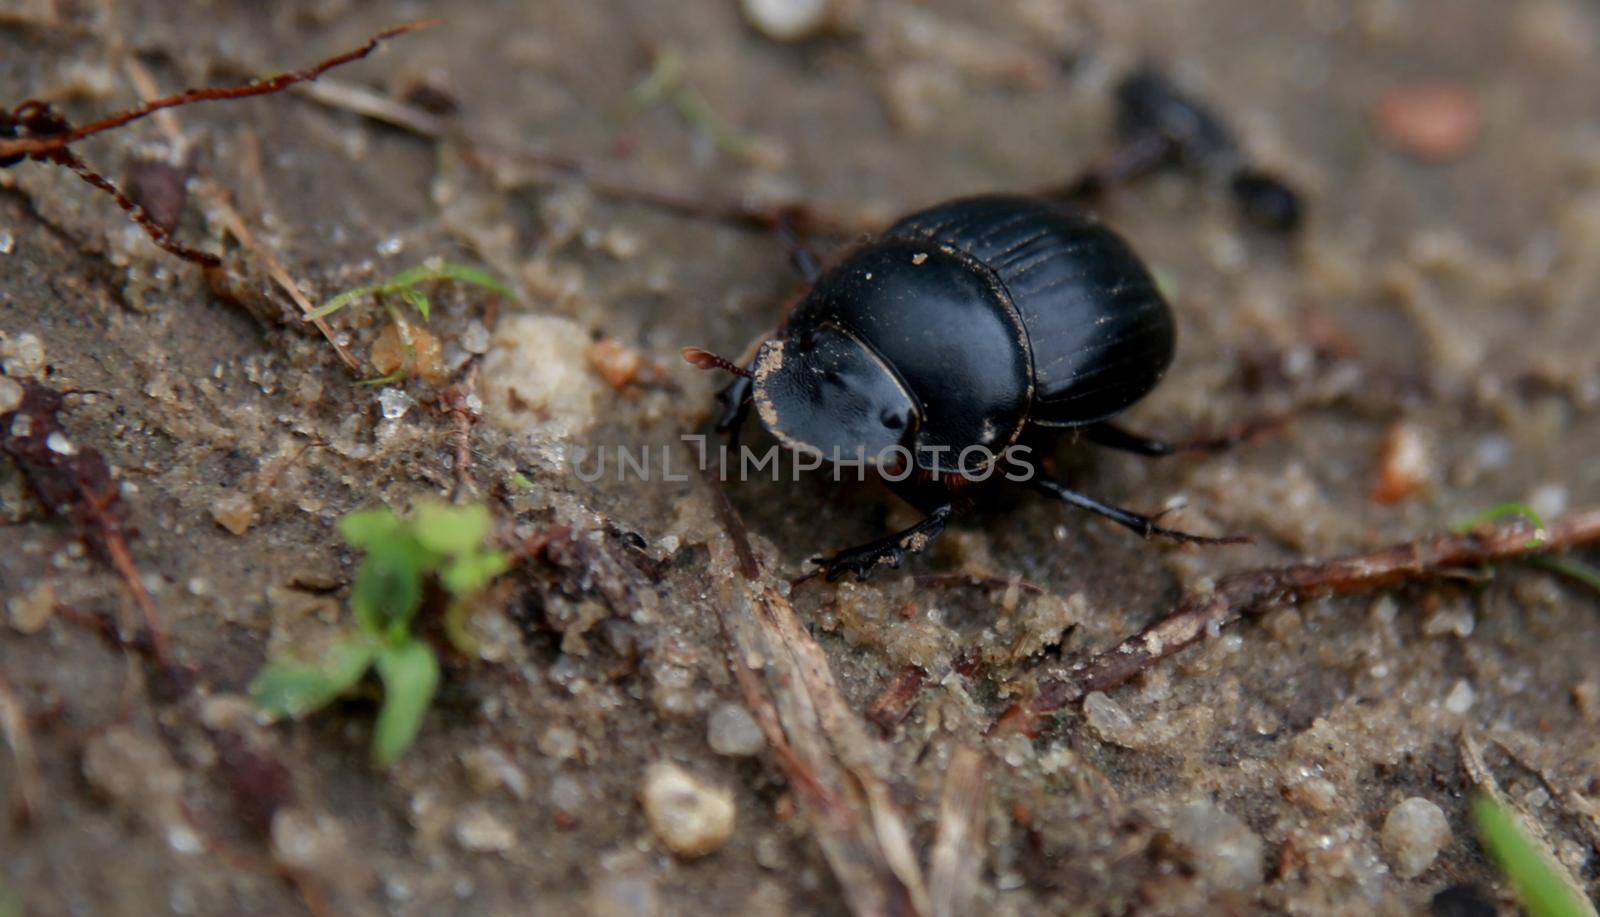 salvador, bahia / brazil - february 26, 2015: scarab beetle, popularly known as bug beetle is seen in a garden in the city of Salvador.

